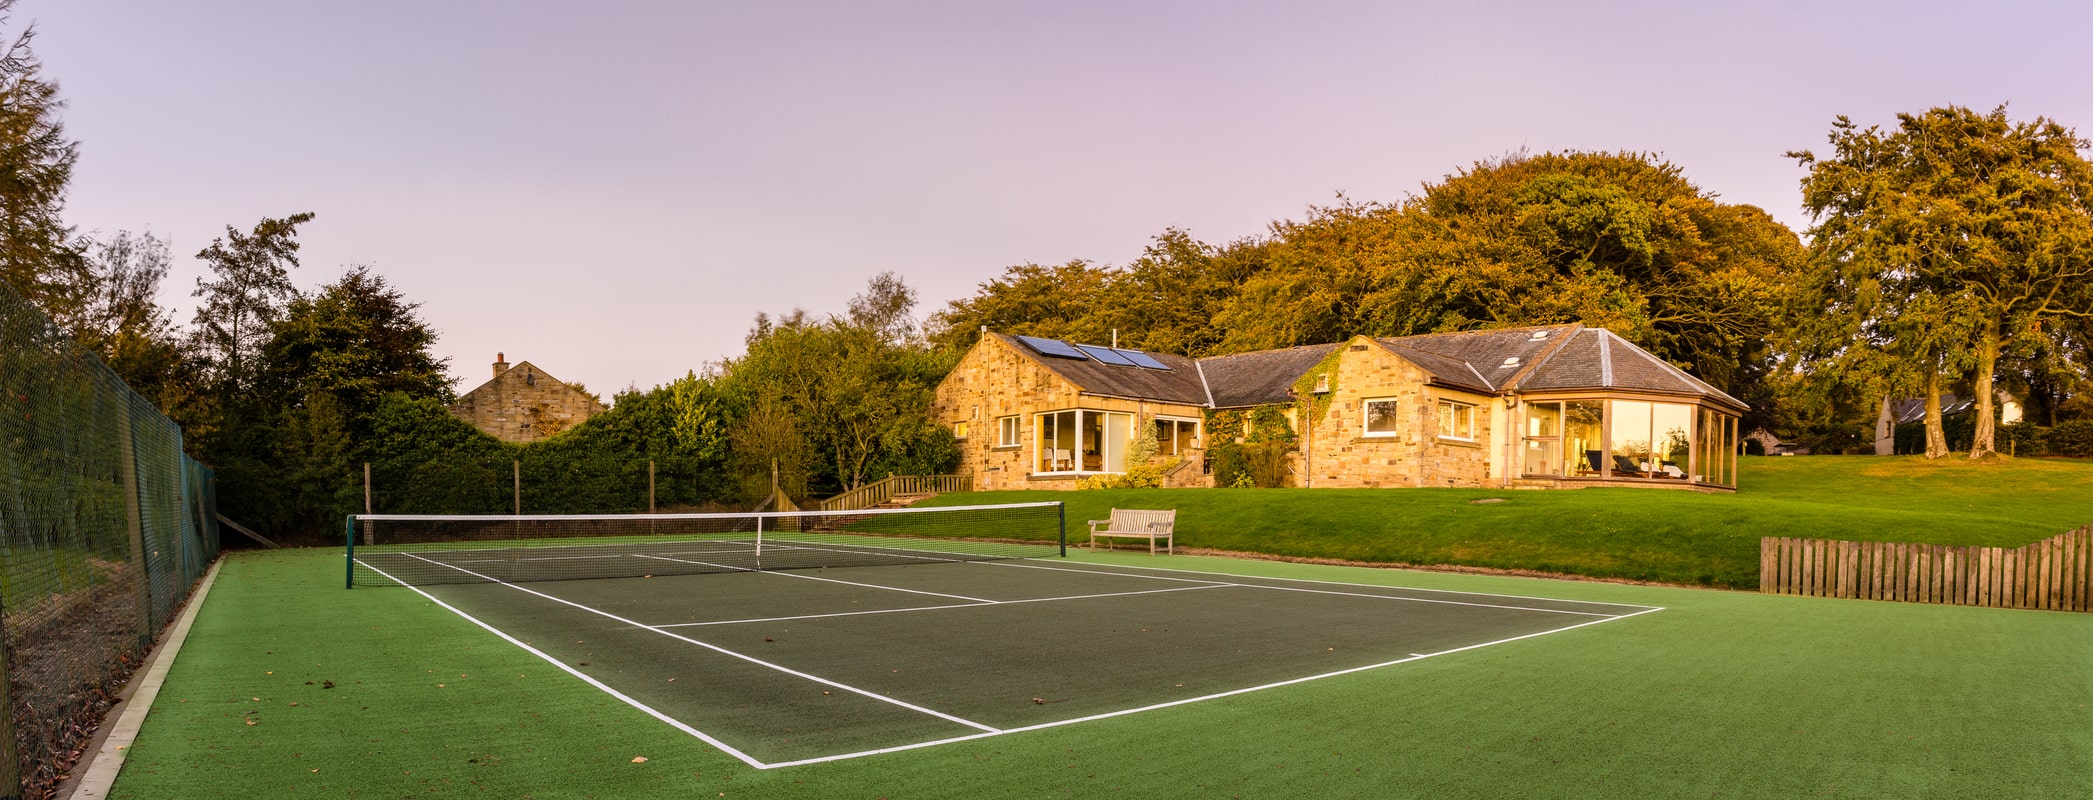 Self-Catering holiday cottage with an outdoor tennis court